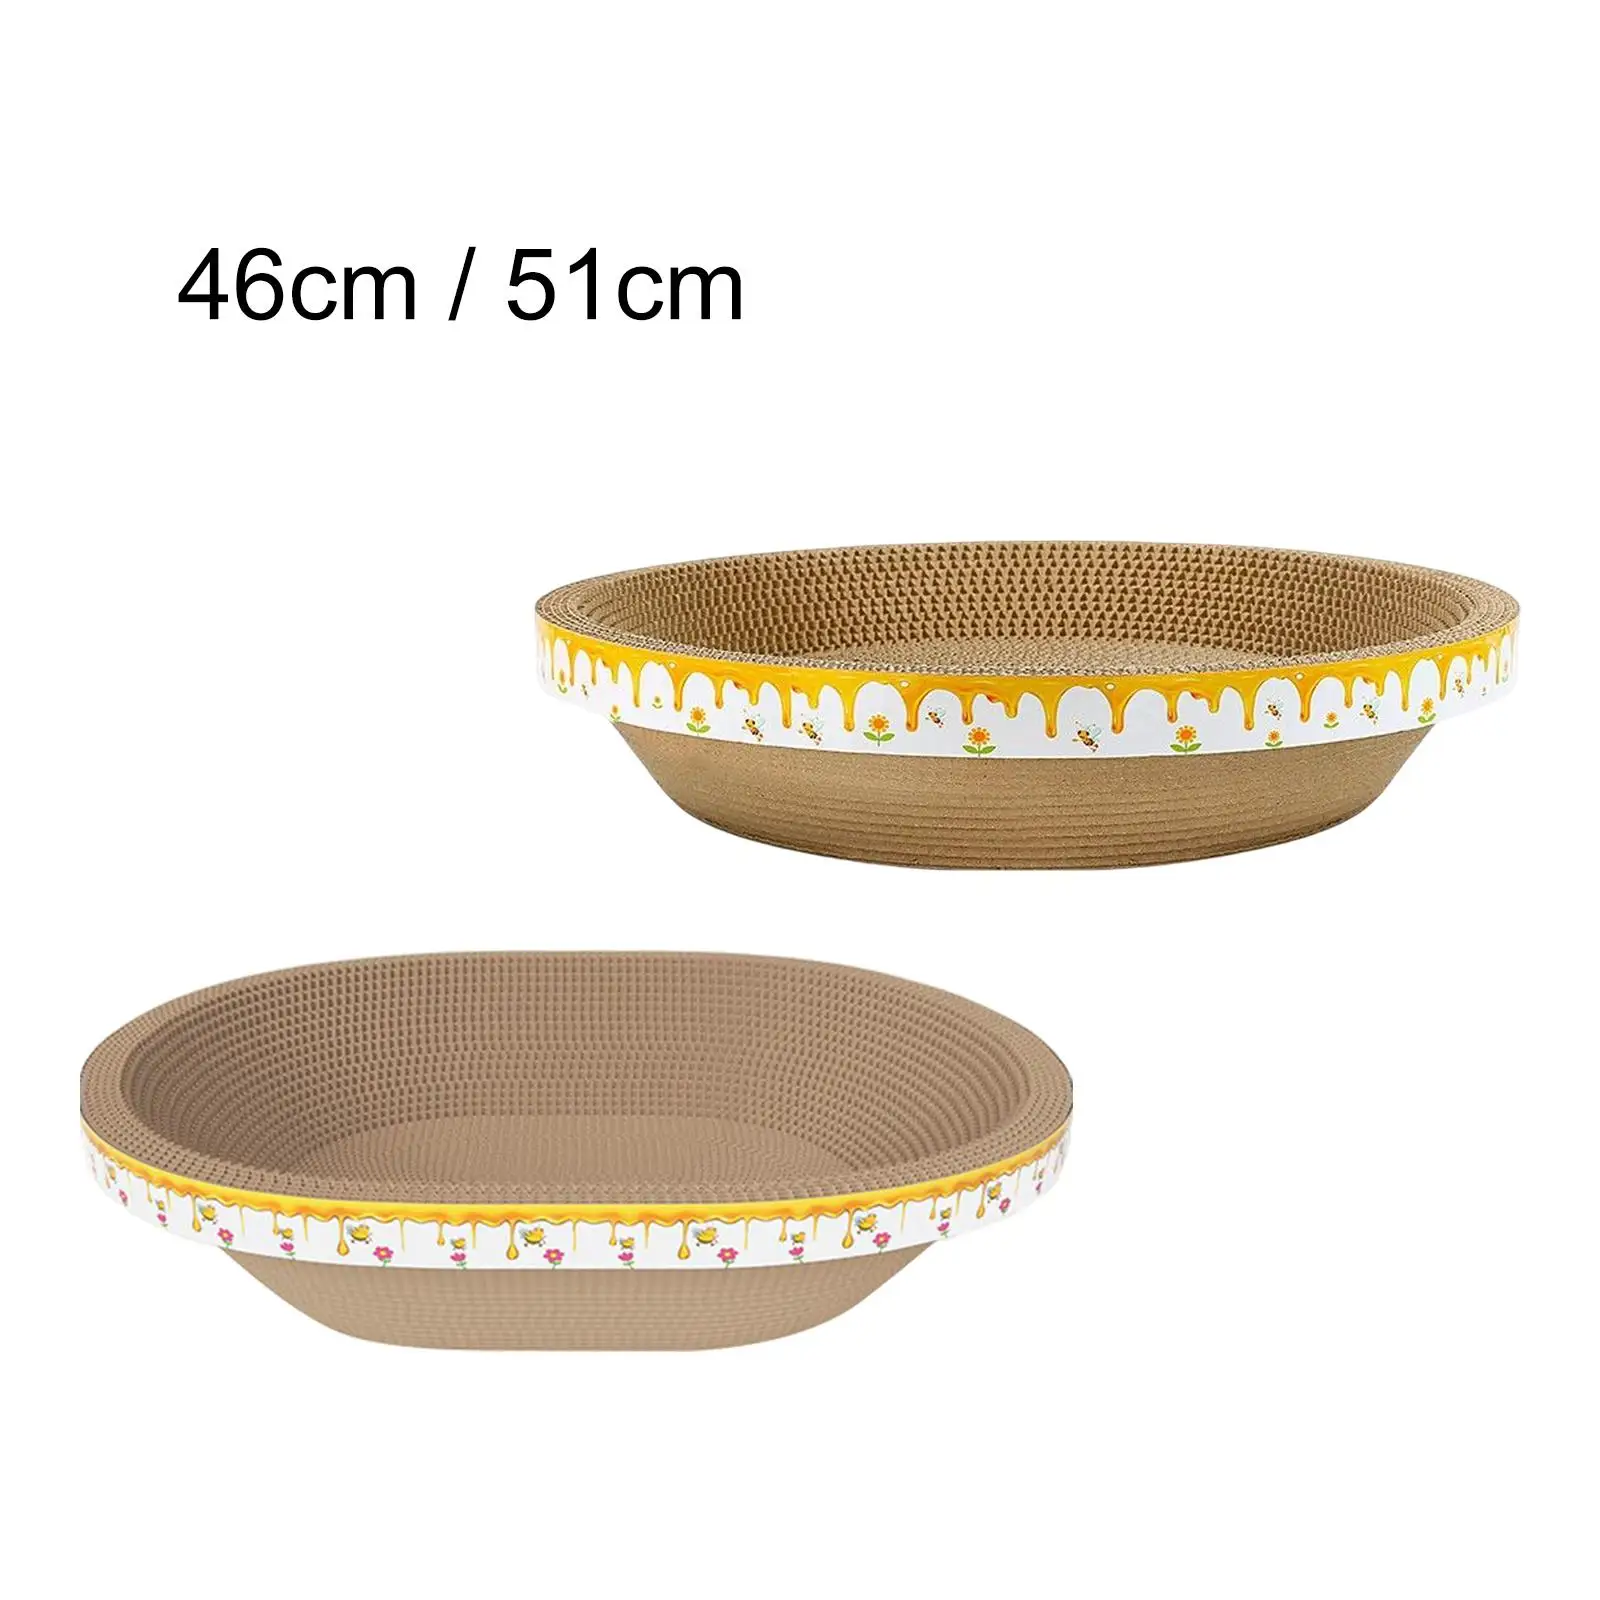 Bowl Shaped Cat Scratcher Sleeping Board Ornament Activity Toys Furniture Protection Scratching Pad for Indoor Cats Bedroom Yard